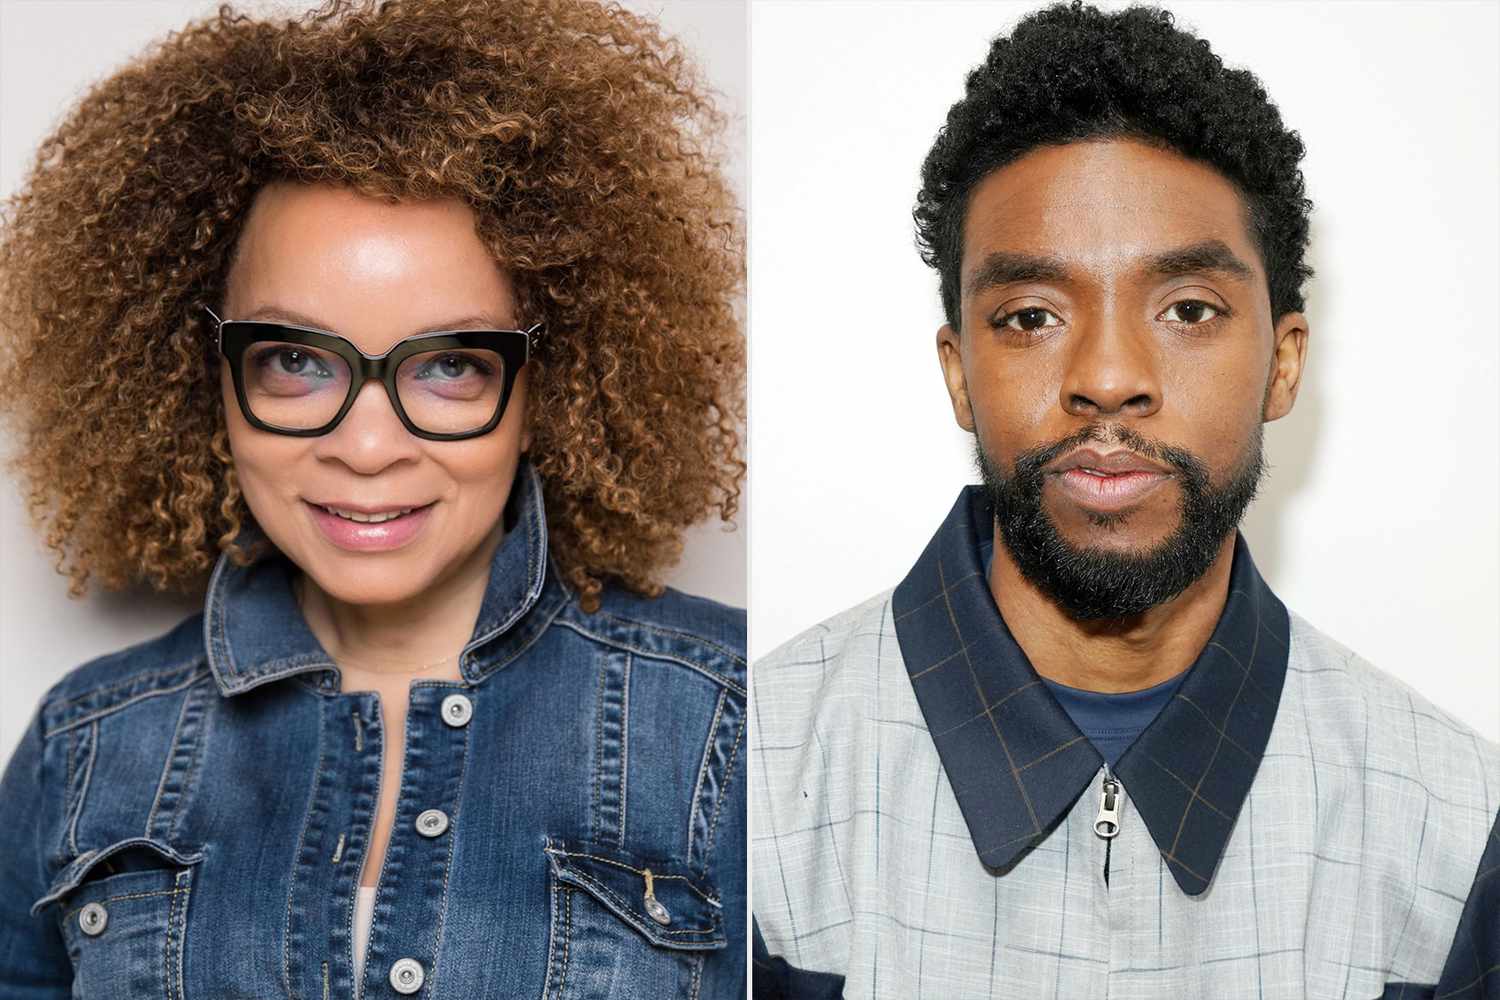 costume-designer-ruth-carter-recalls-the-first-time-she-saw-chadwick-boseman-in-black-panther-suit